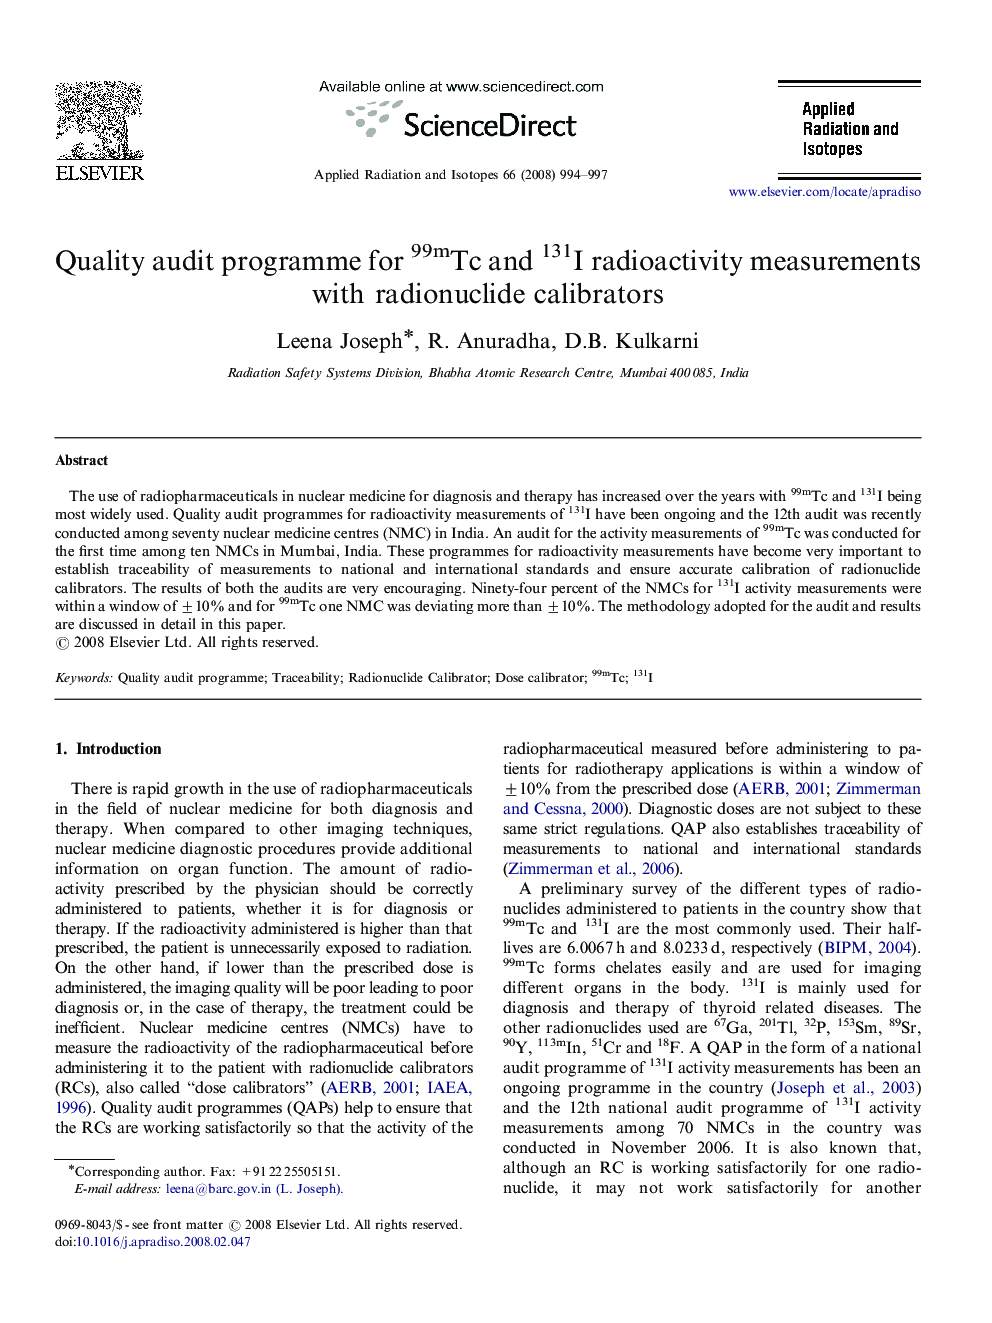 Quality audit programme for 99mTc and 131I radioactivity measurements with radionuclide calibrators